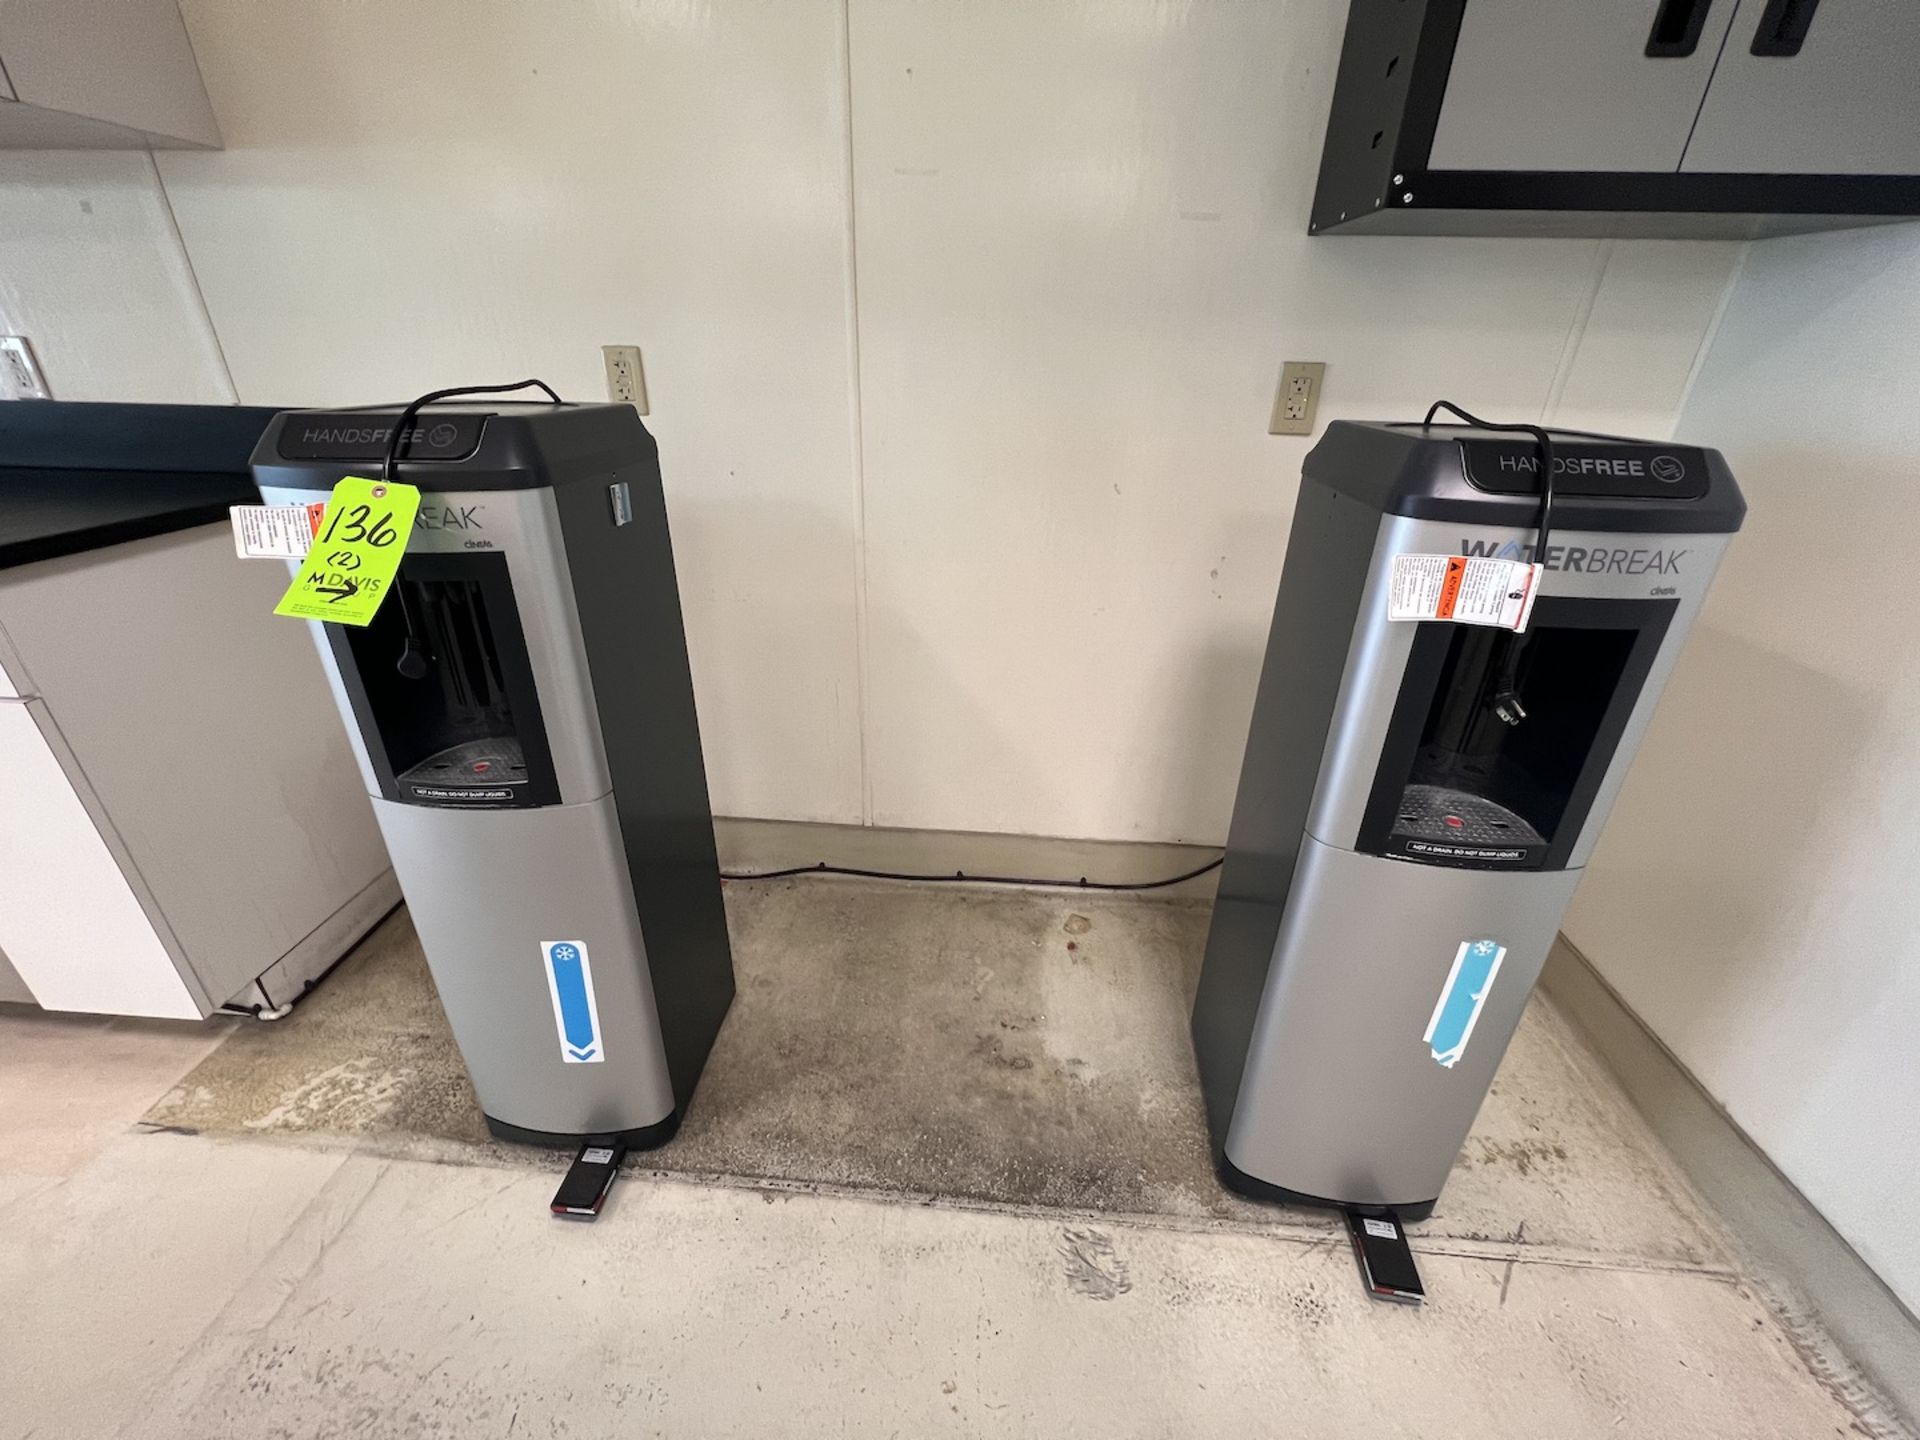 (2) WATERBREAK DRINKING WATER COOLERS (RIGGING & SIMPLE LOADING FEE $20.00) (NOTE: DOES NOT INCLUDE